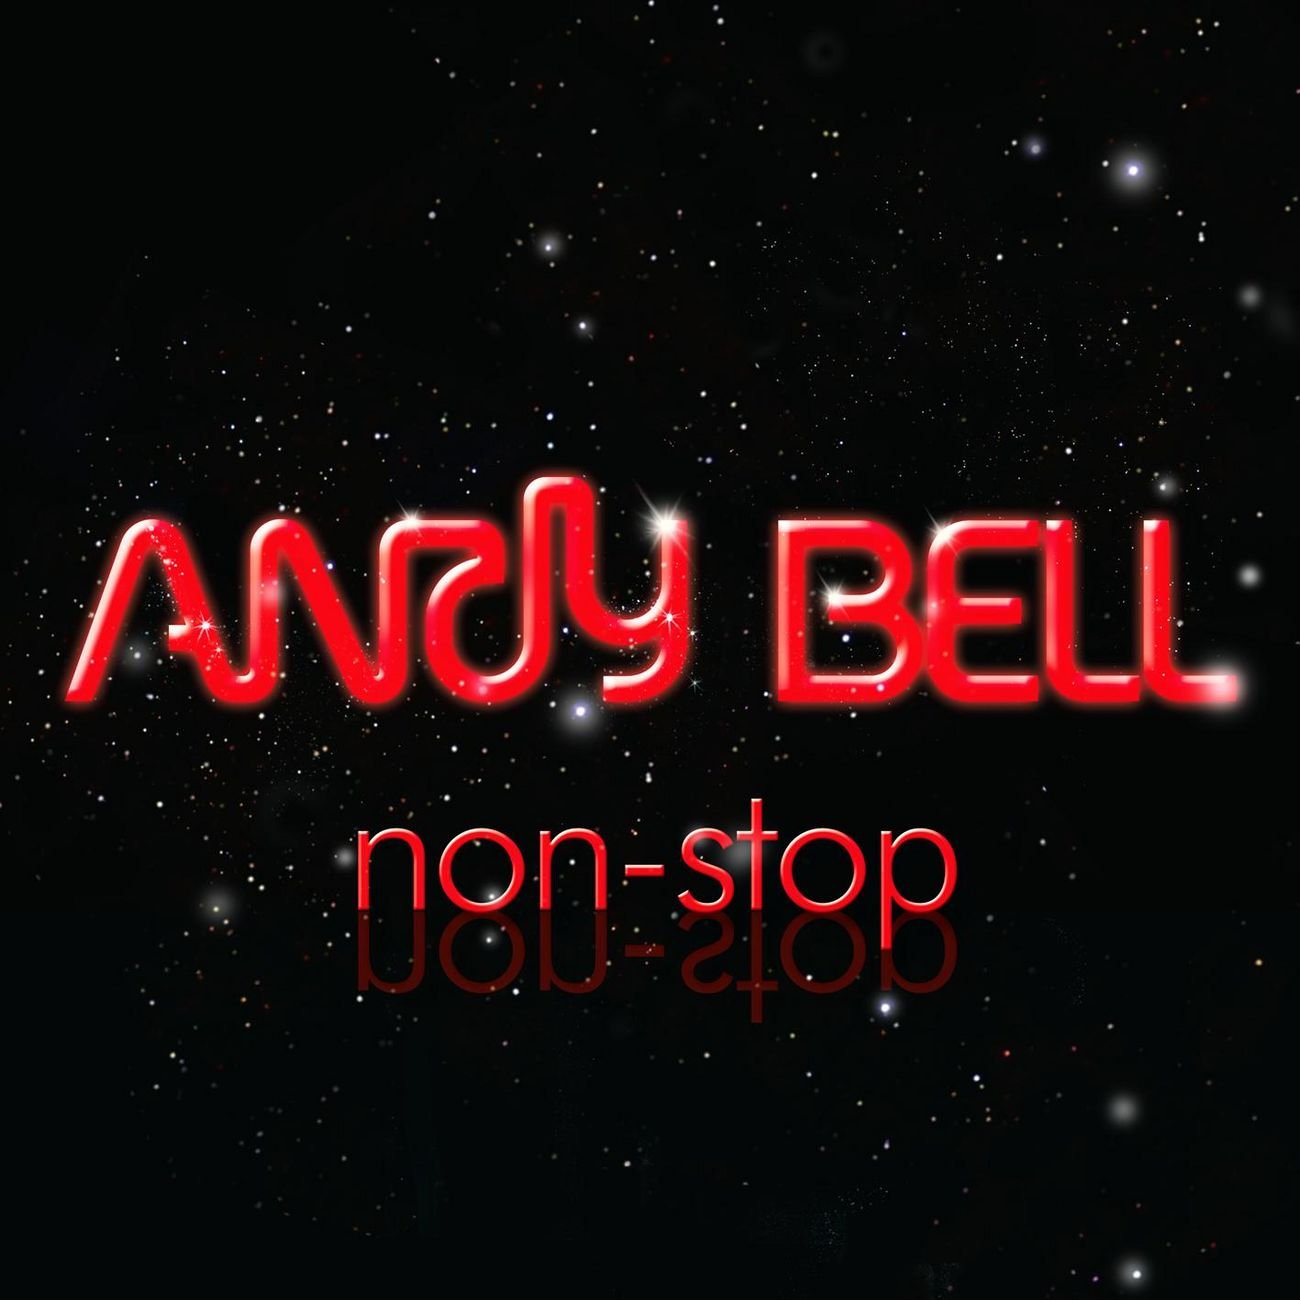 Andy Bell - Non-Stop (2010) FLAC Download